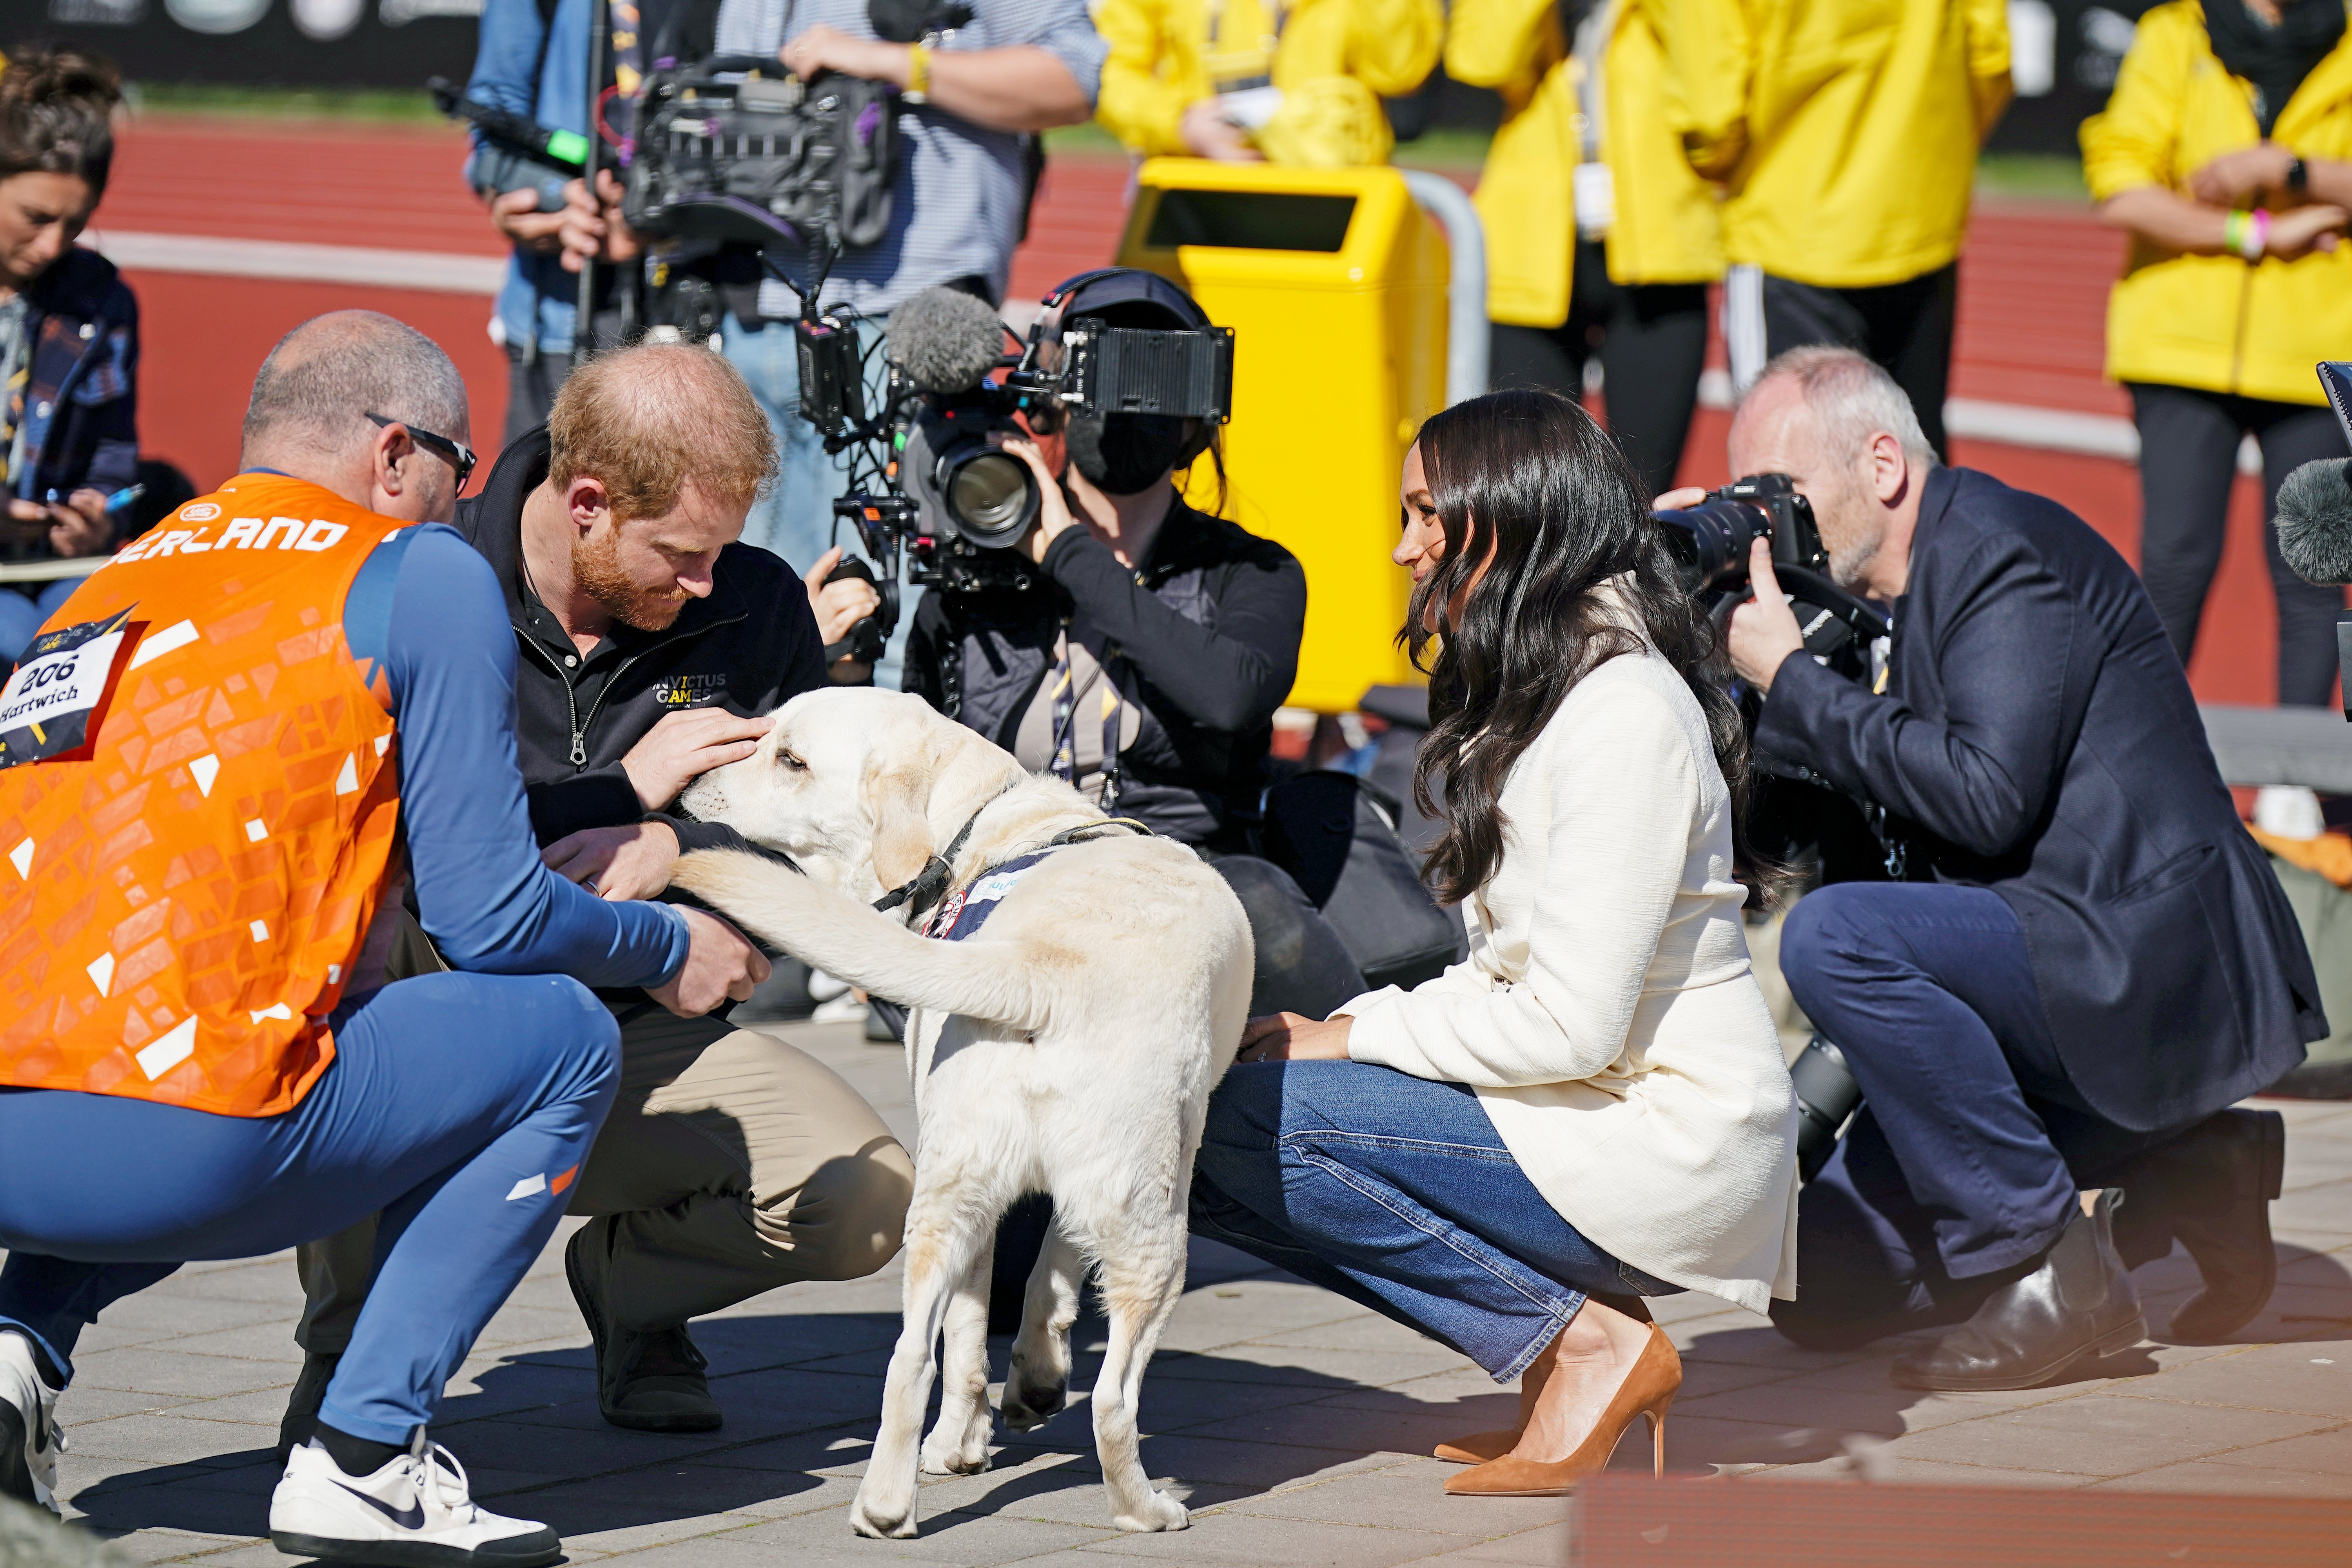 The Duke and Duchess of Sussex meet a competitor from the Netherlands and his dog at the Invictus Games athletics events in the Athletics Park, at Zuiderpark the Hague, Netherlands. Picture date: Sunday April 17, 2022. | Source: Getty Images